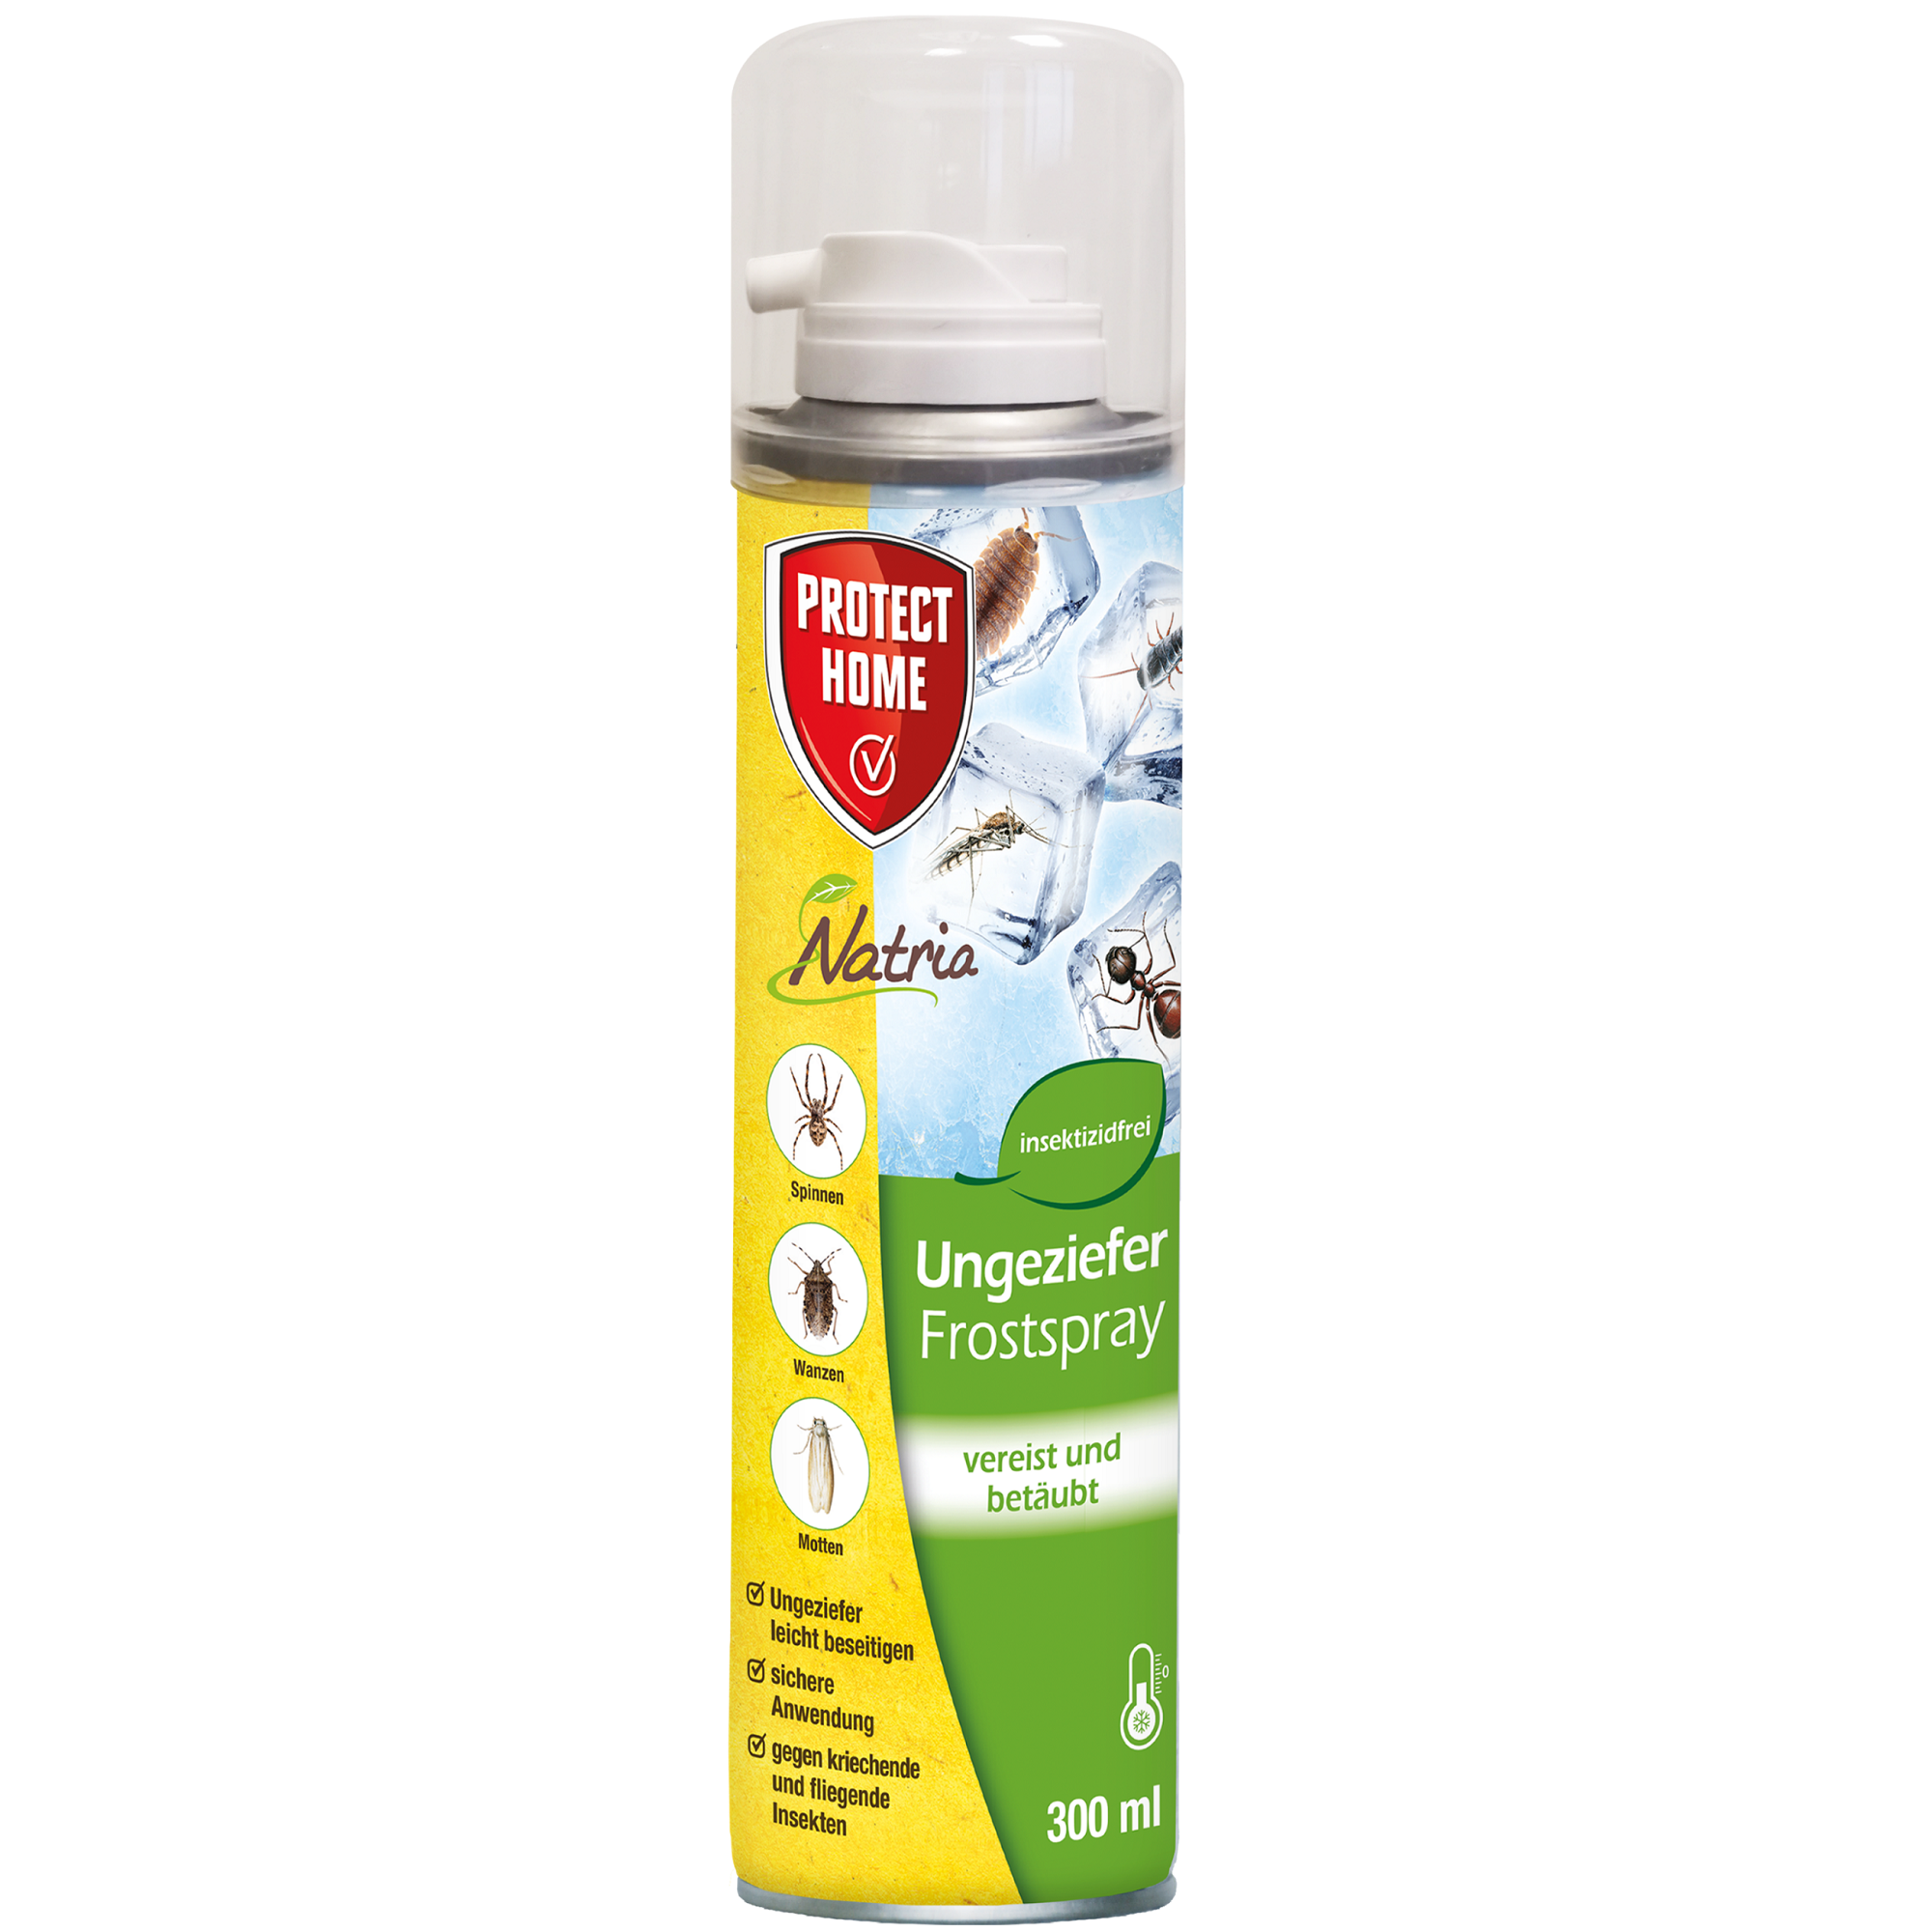 Ungeziefer-Frostspray 'Natria' 300 ml + product picture